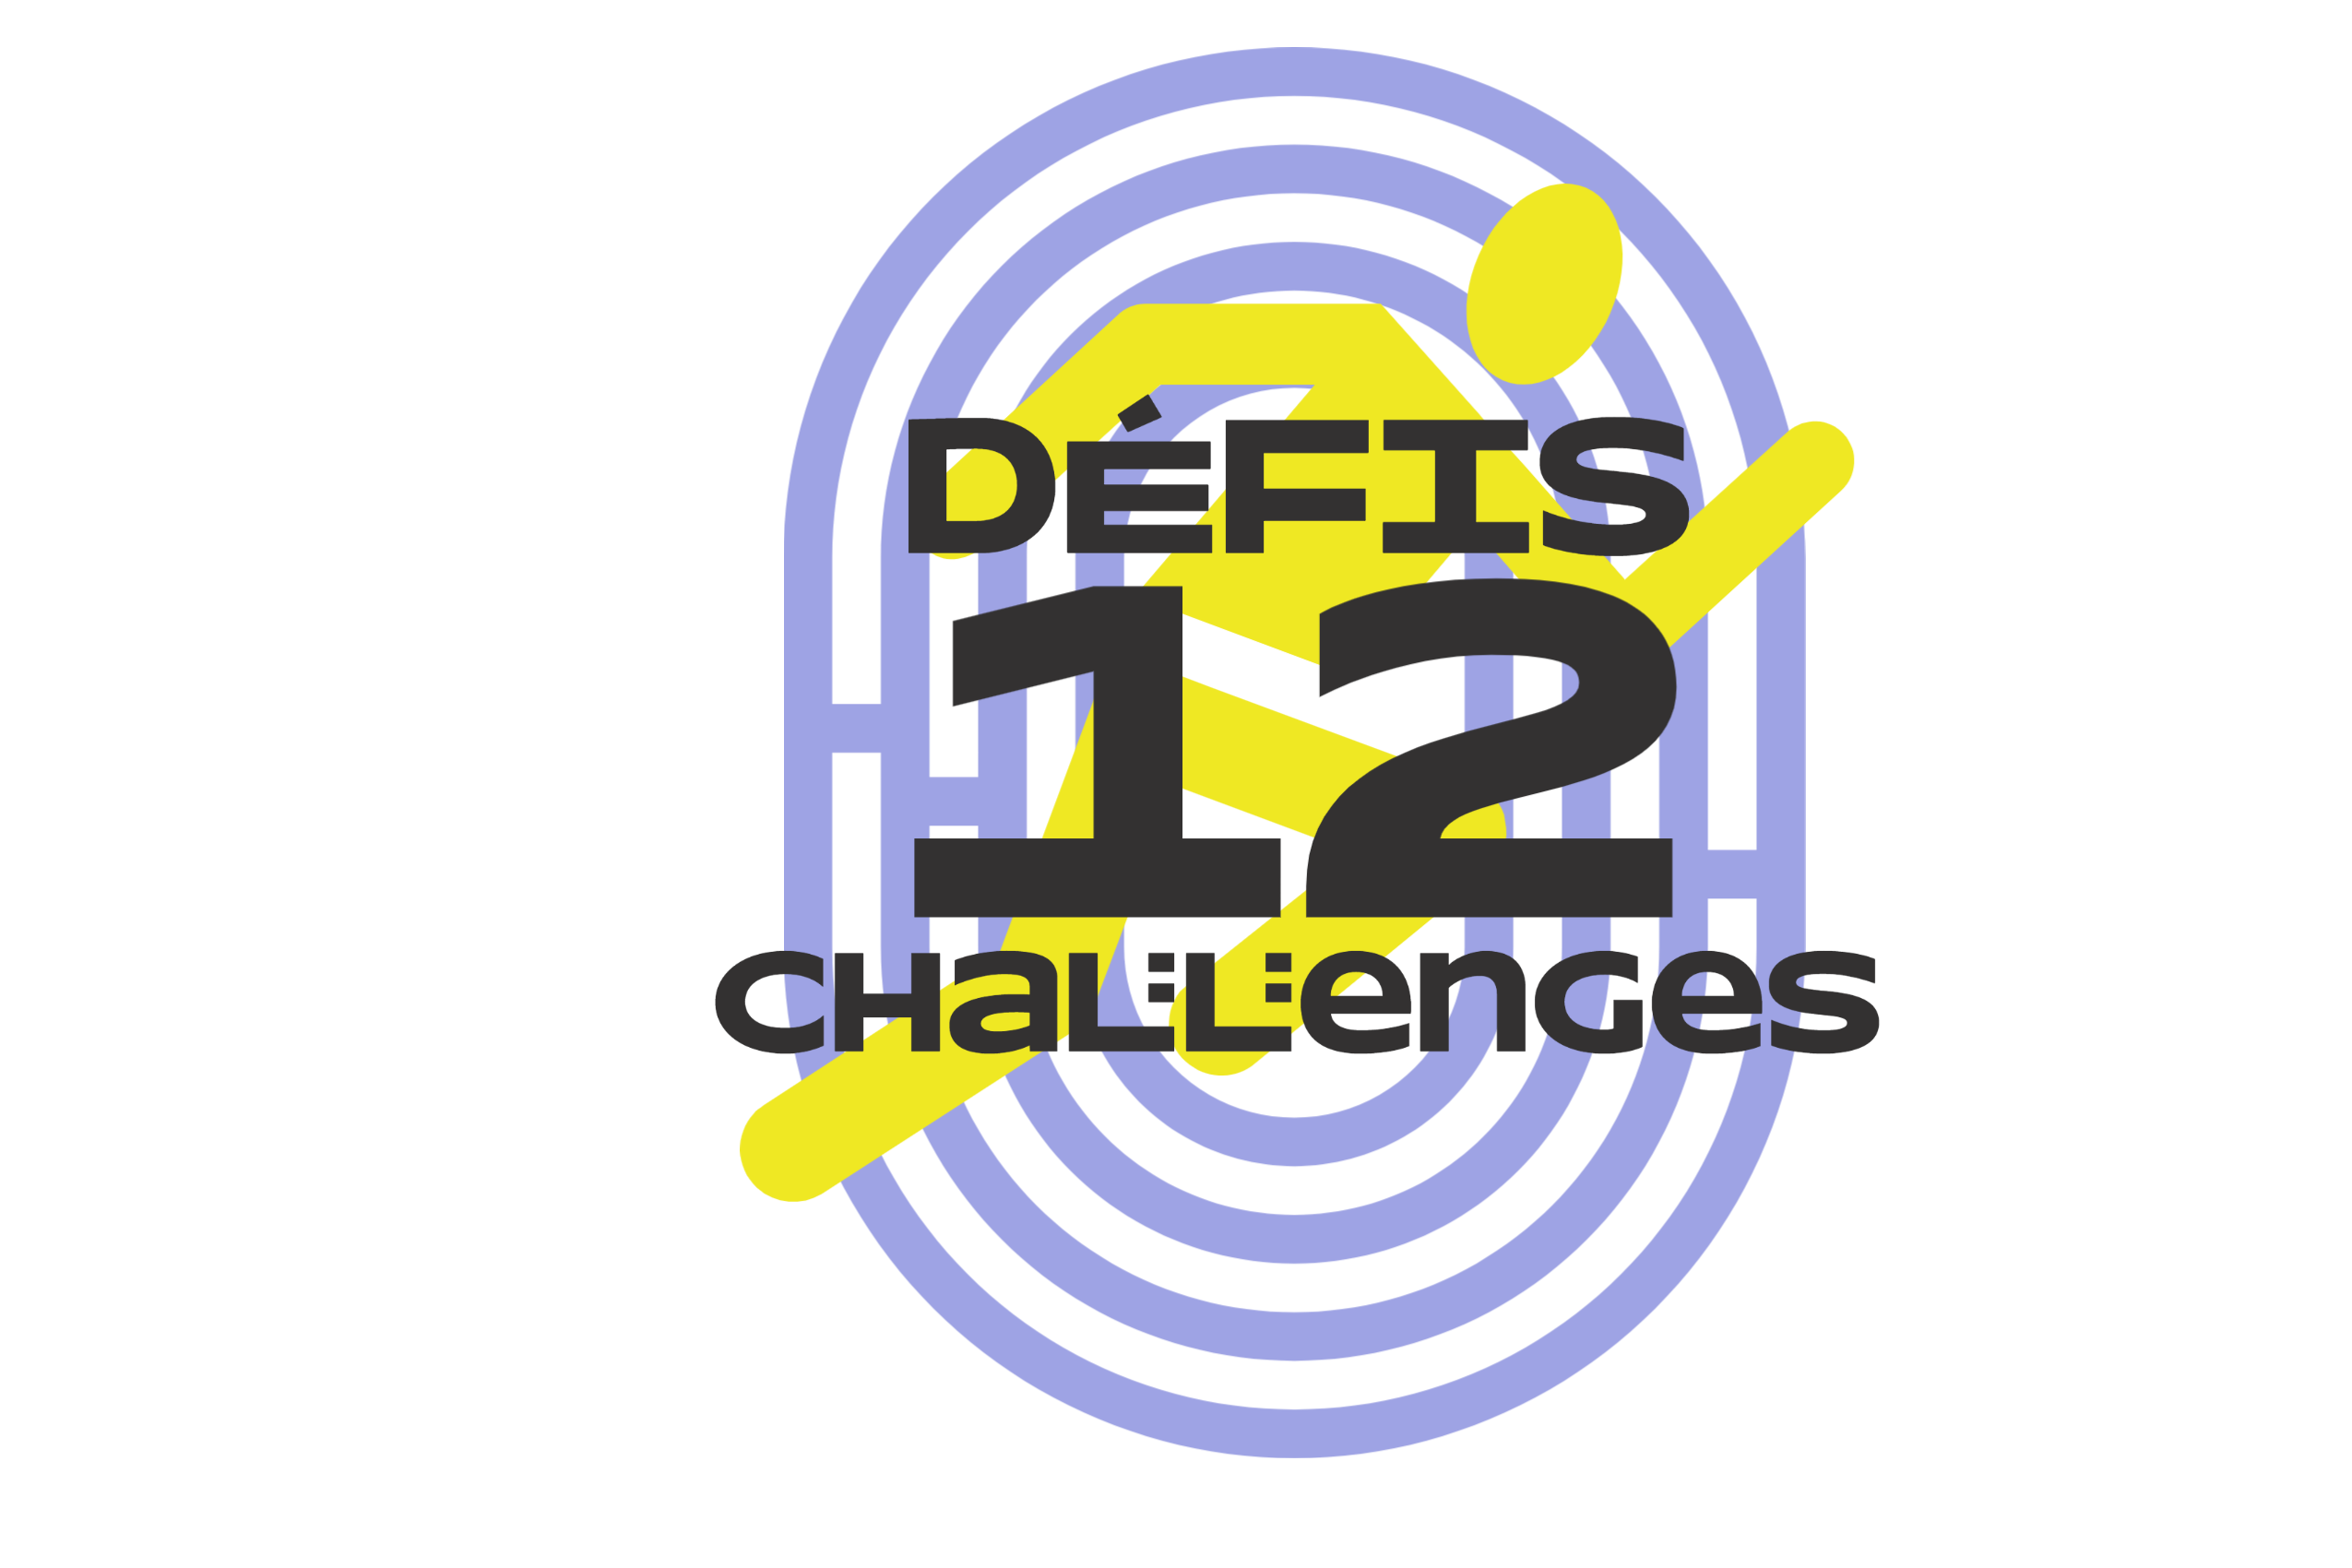 The 12 Challenges - Dieppe